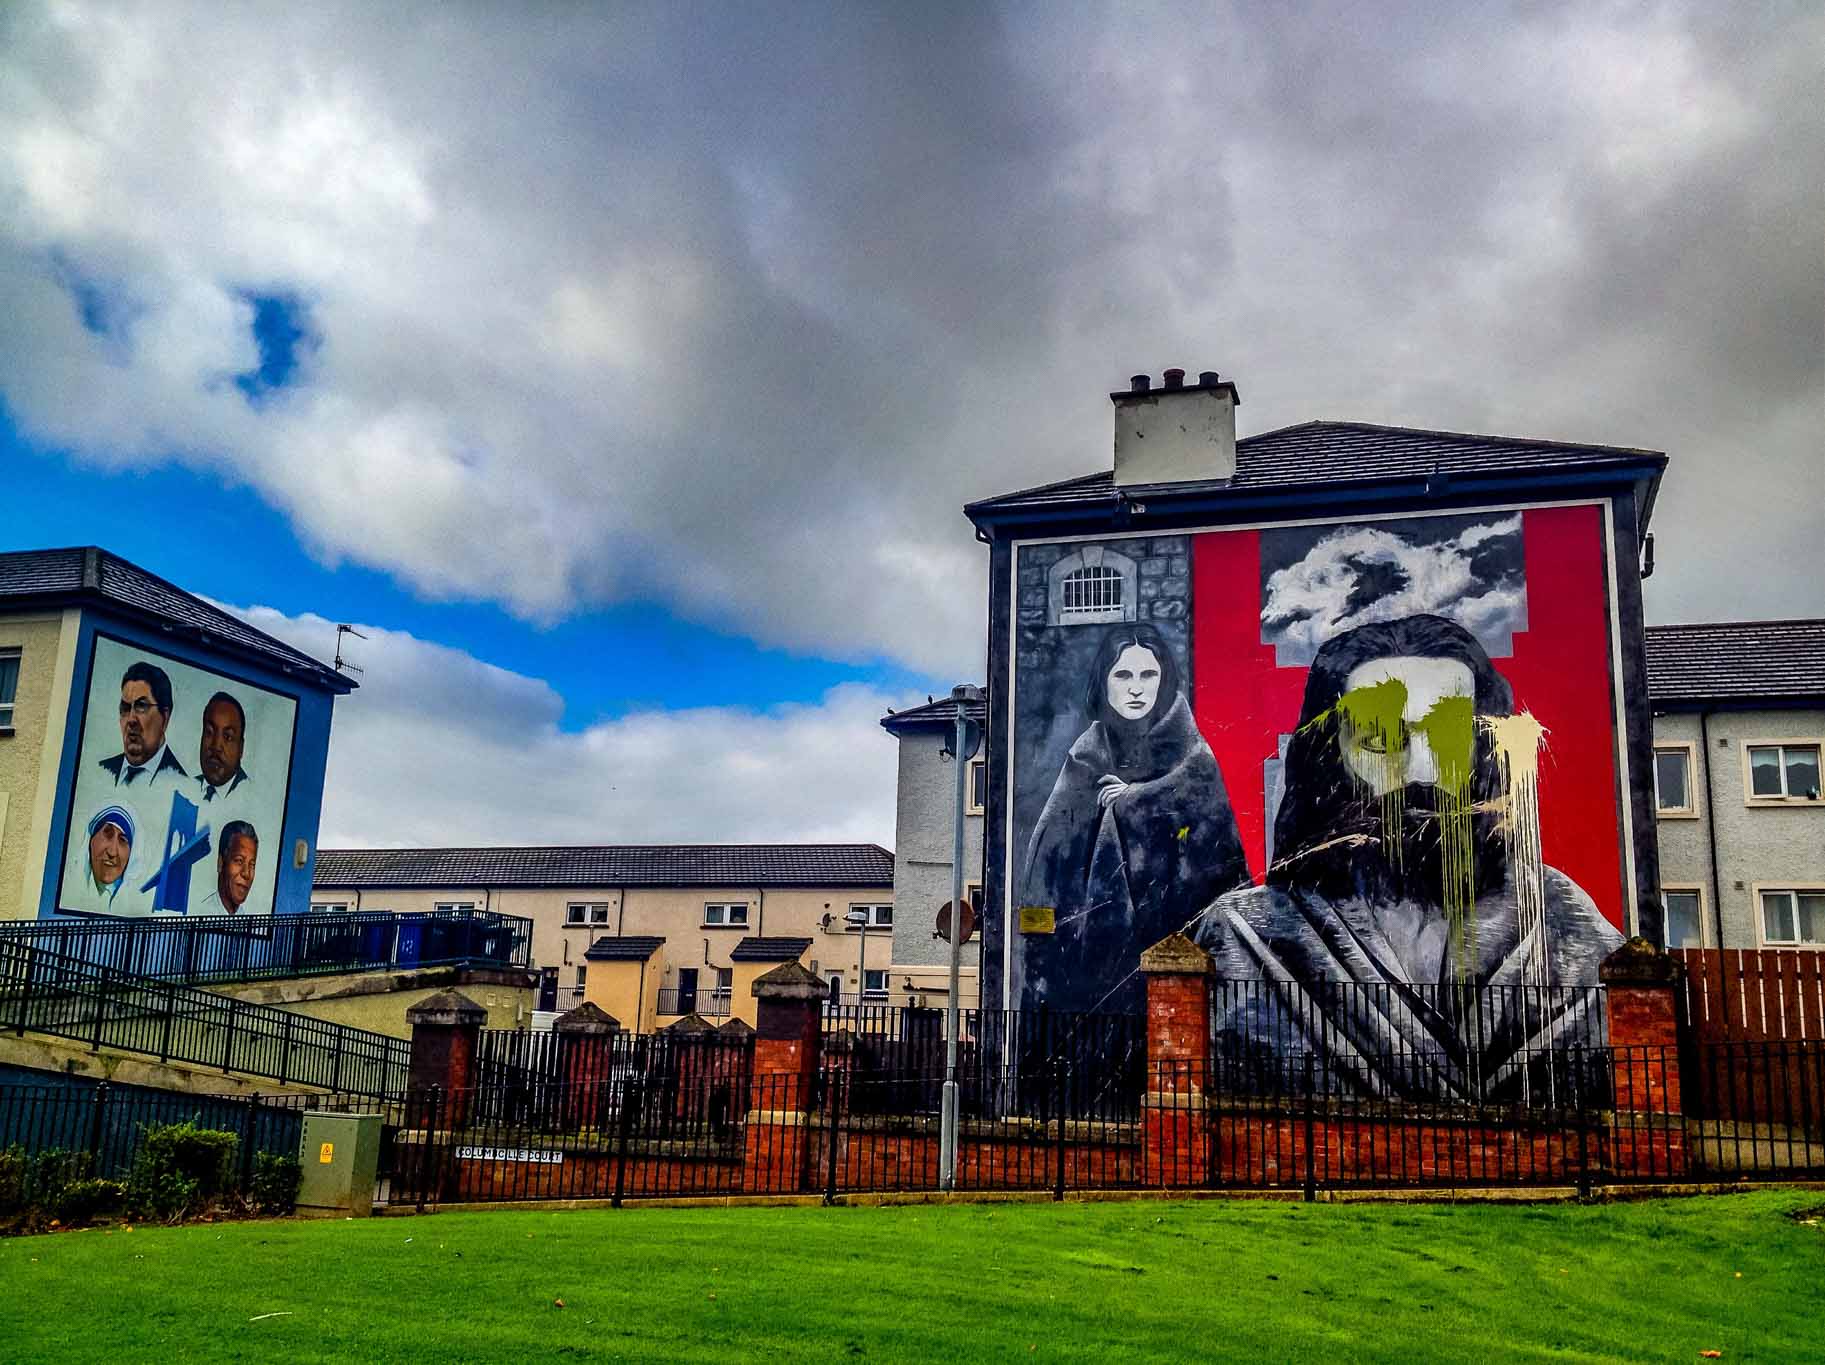 Two of the IRA murals in Derry -- The Hungers Strikers mural with vandalism and the John Hume mural